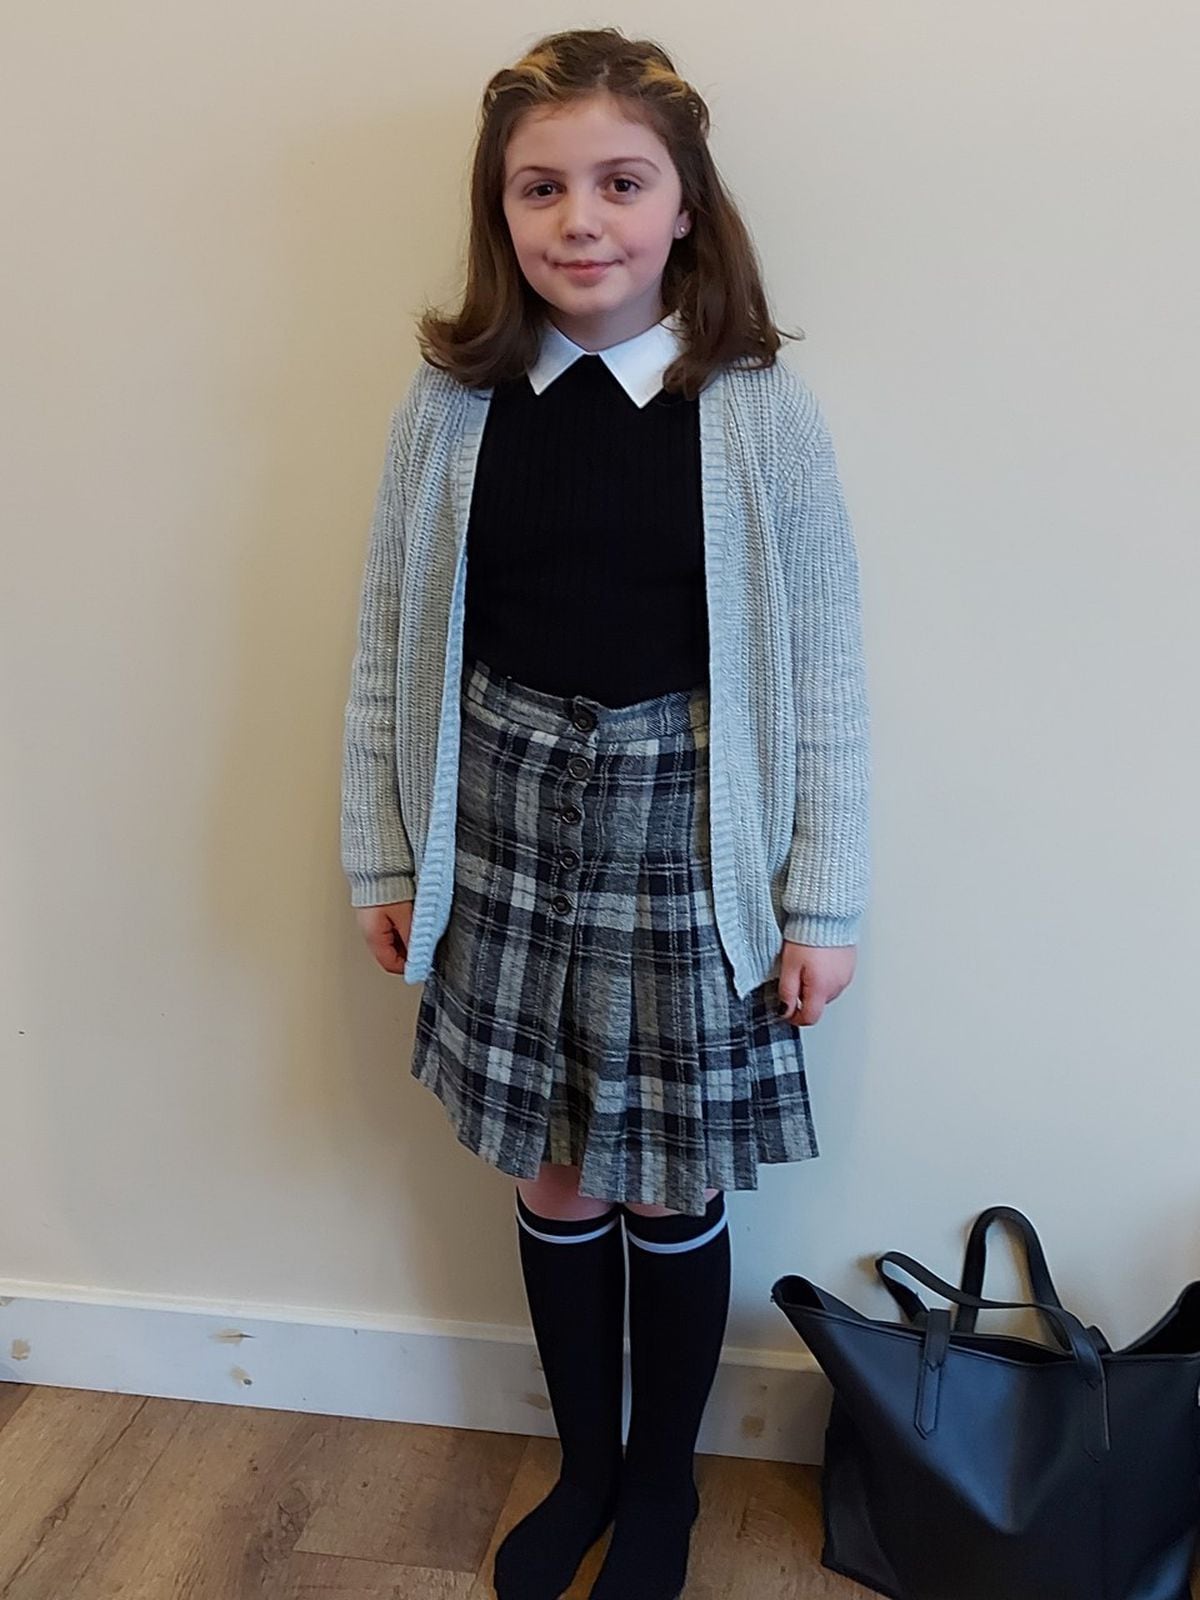 Louise Perks, aged 10, who has dressed up as Anne Frank for World Book Day